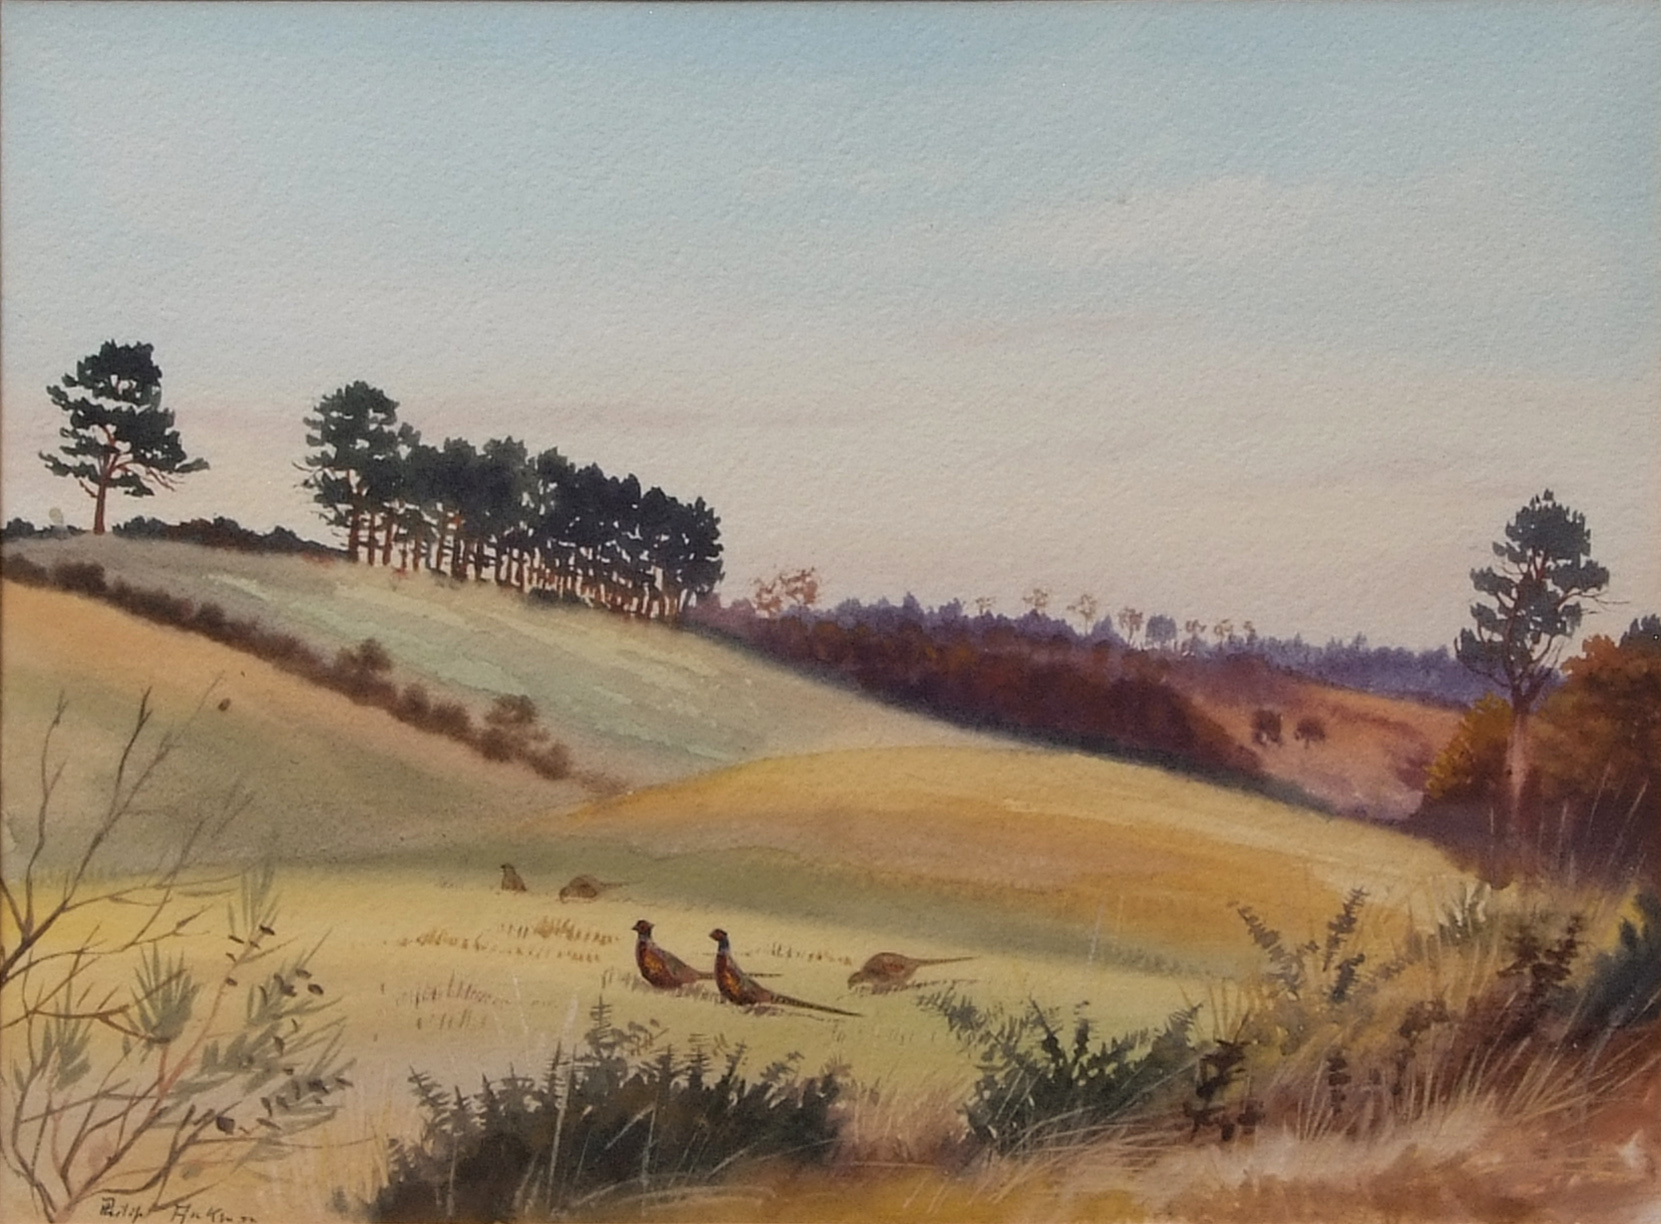 AR PHILIP RICKMAN (1891-1982) "Chilbolton Down - the evening feed" watercolour, signed lower left 25